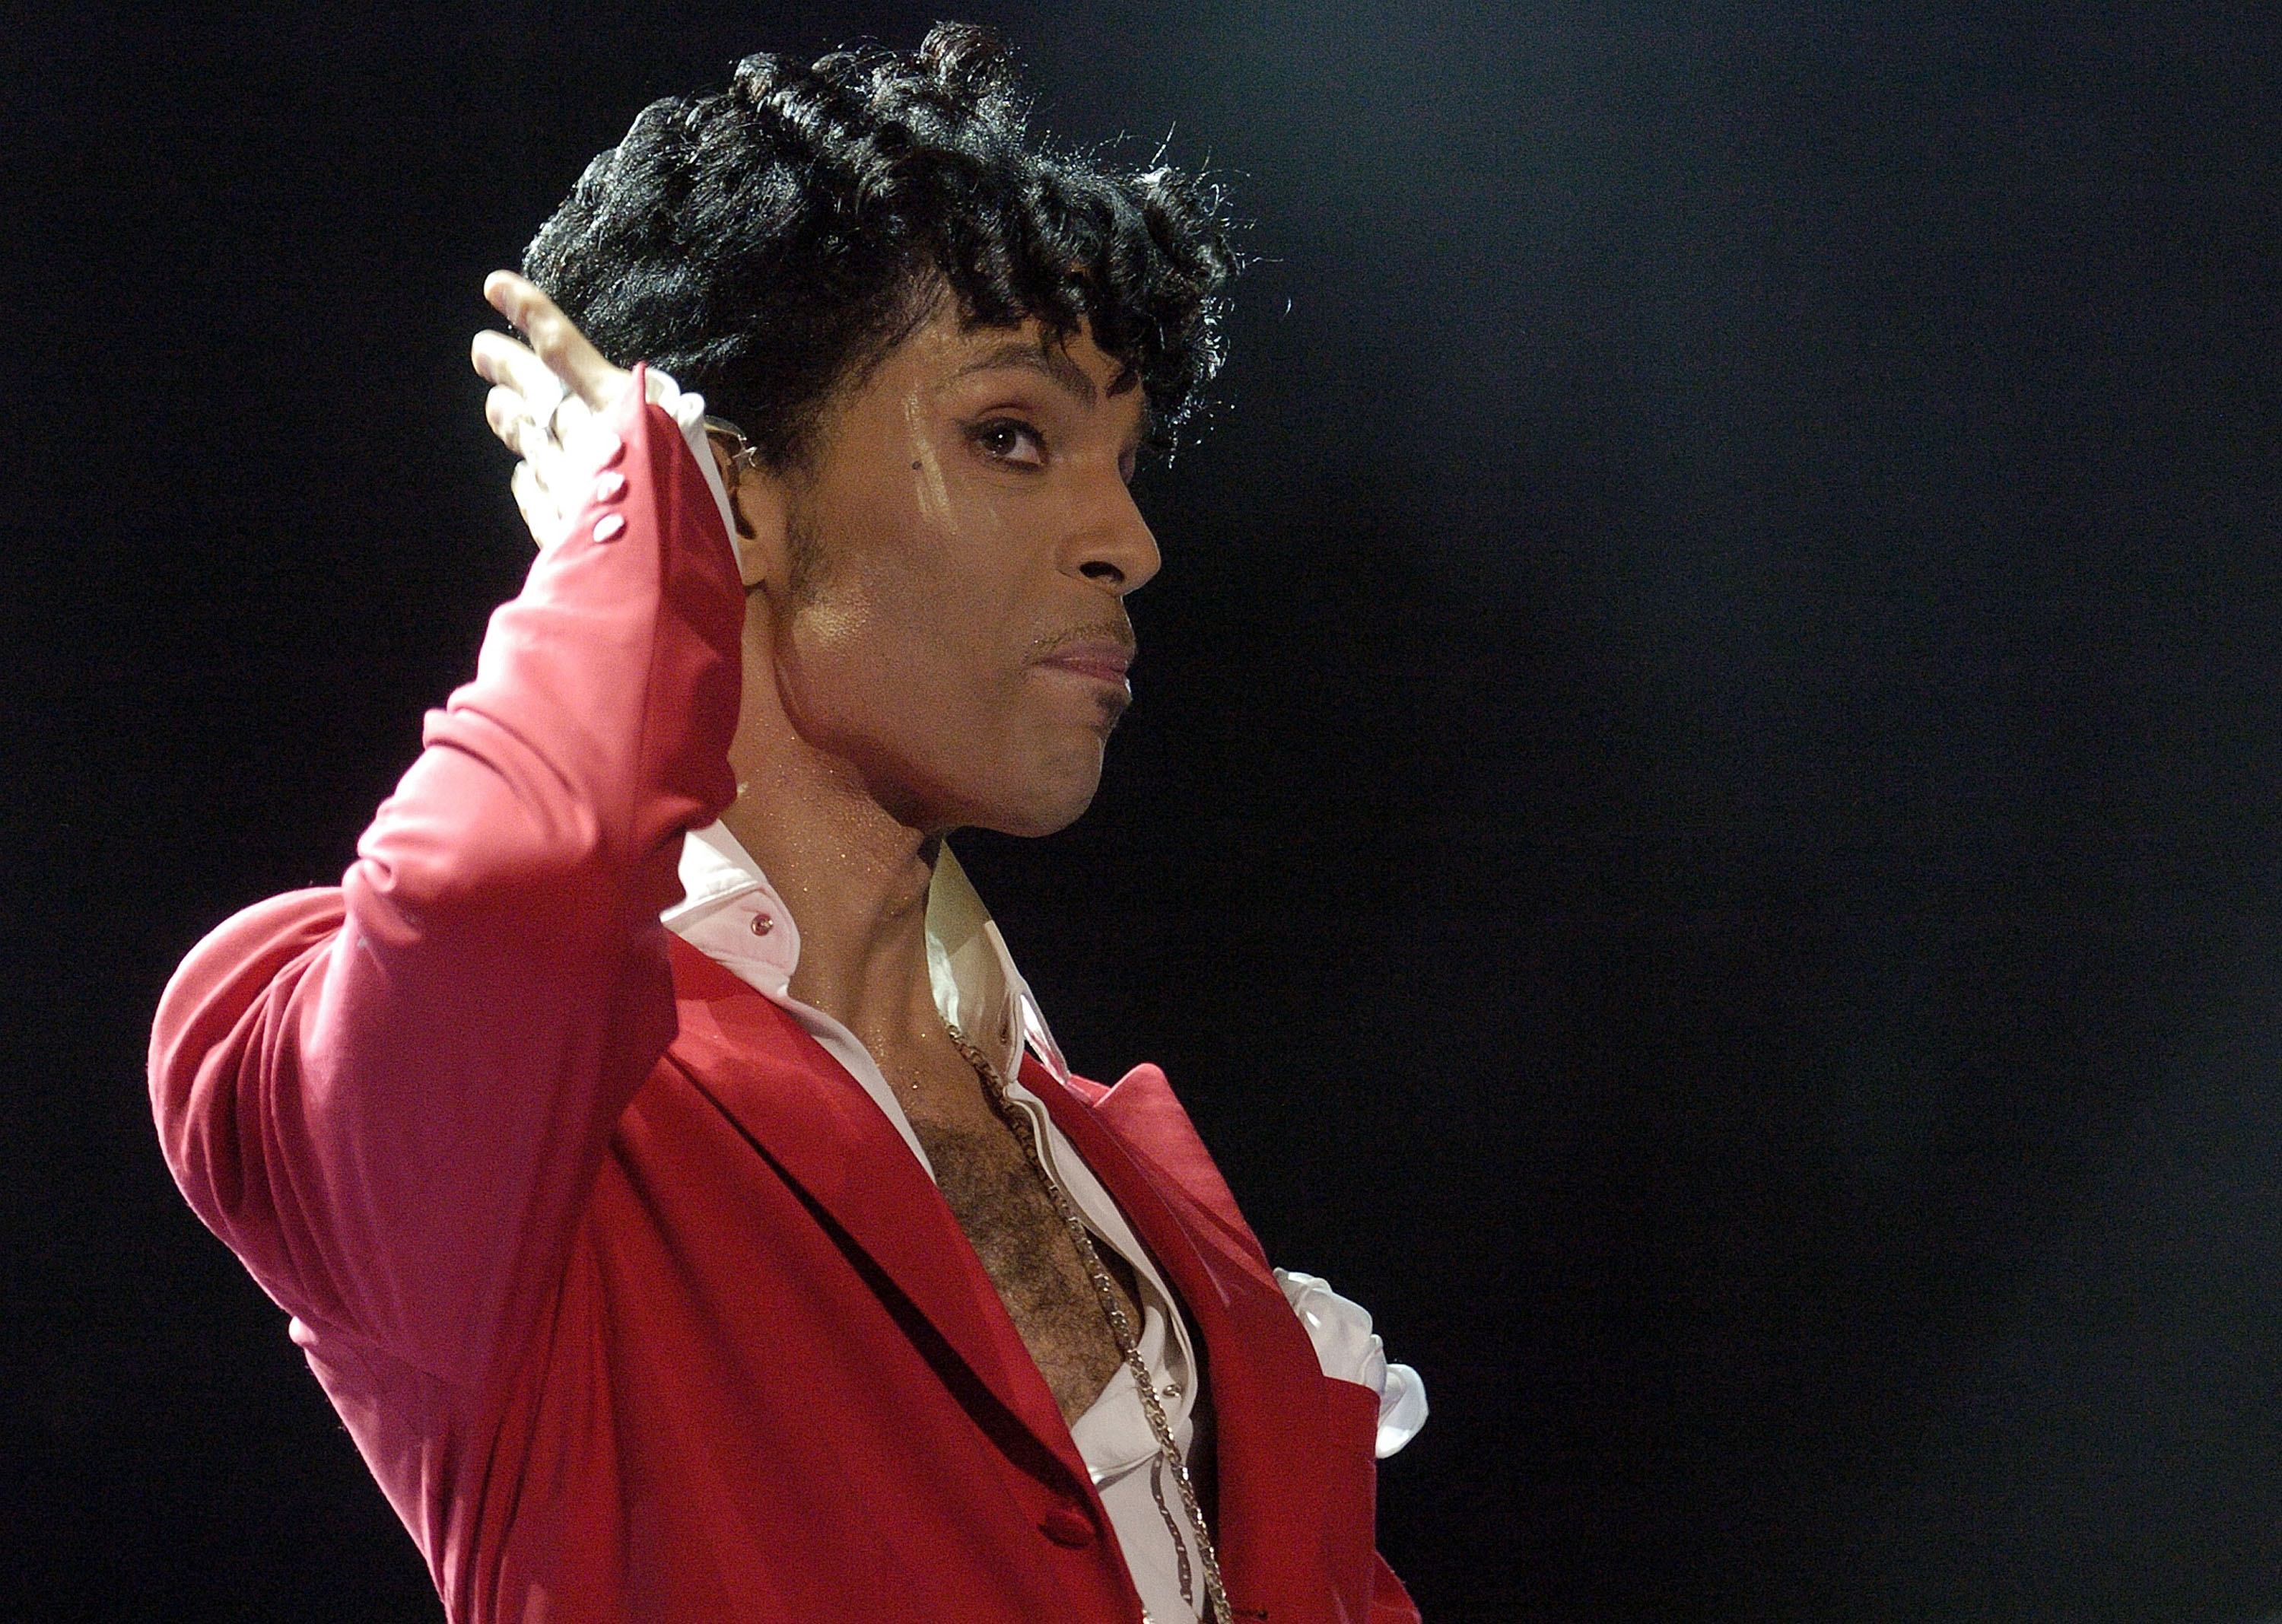 Prince performs during the 10th Anniversary Essence Music Festival on July 2, 2004 in New Orleans, Louisiana | Source: Getty Images